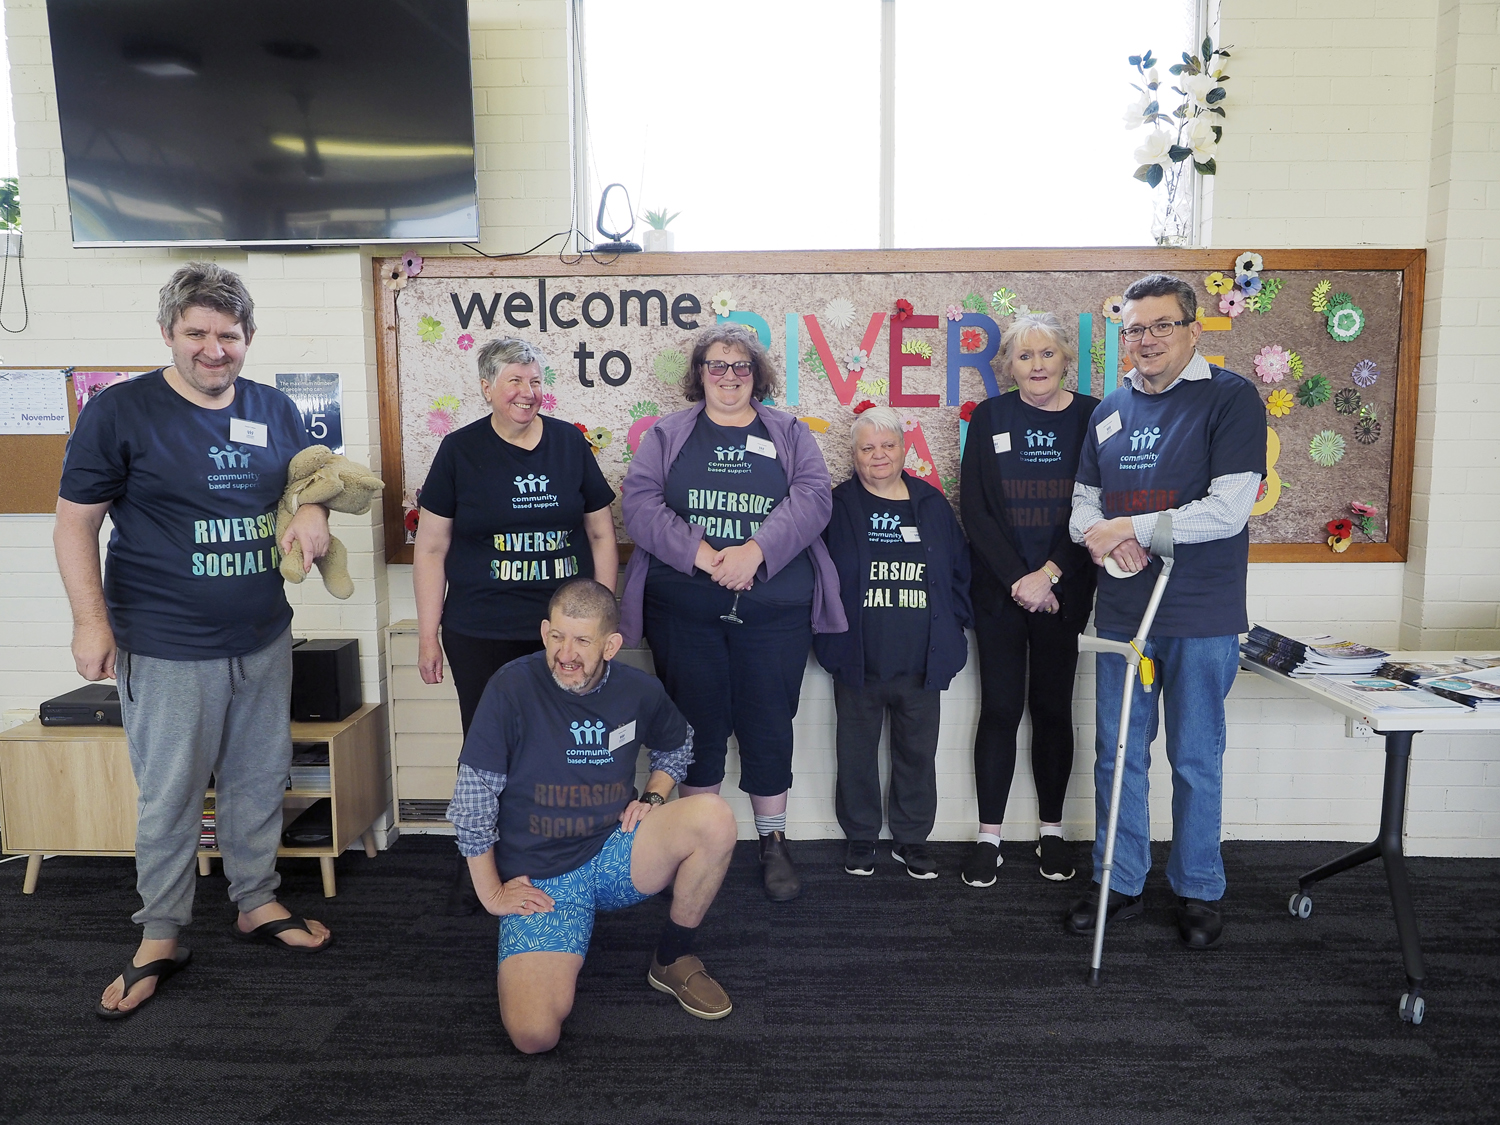 A group of people in matching t-shirts pose for a photo in front of a handmade sign